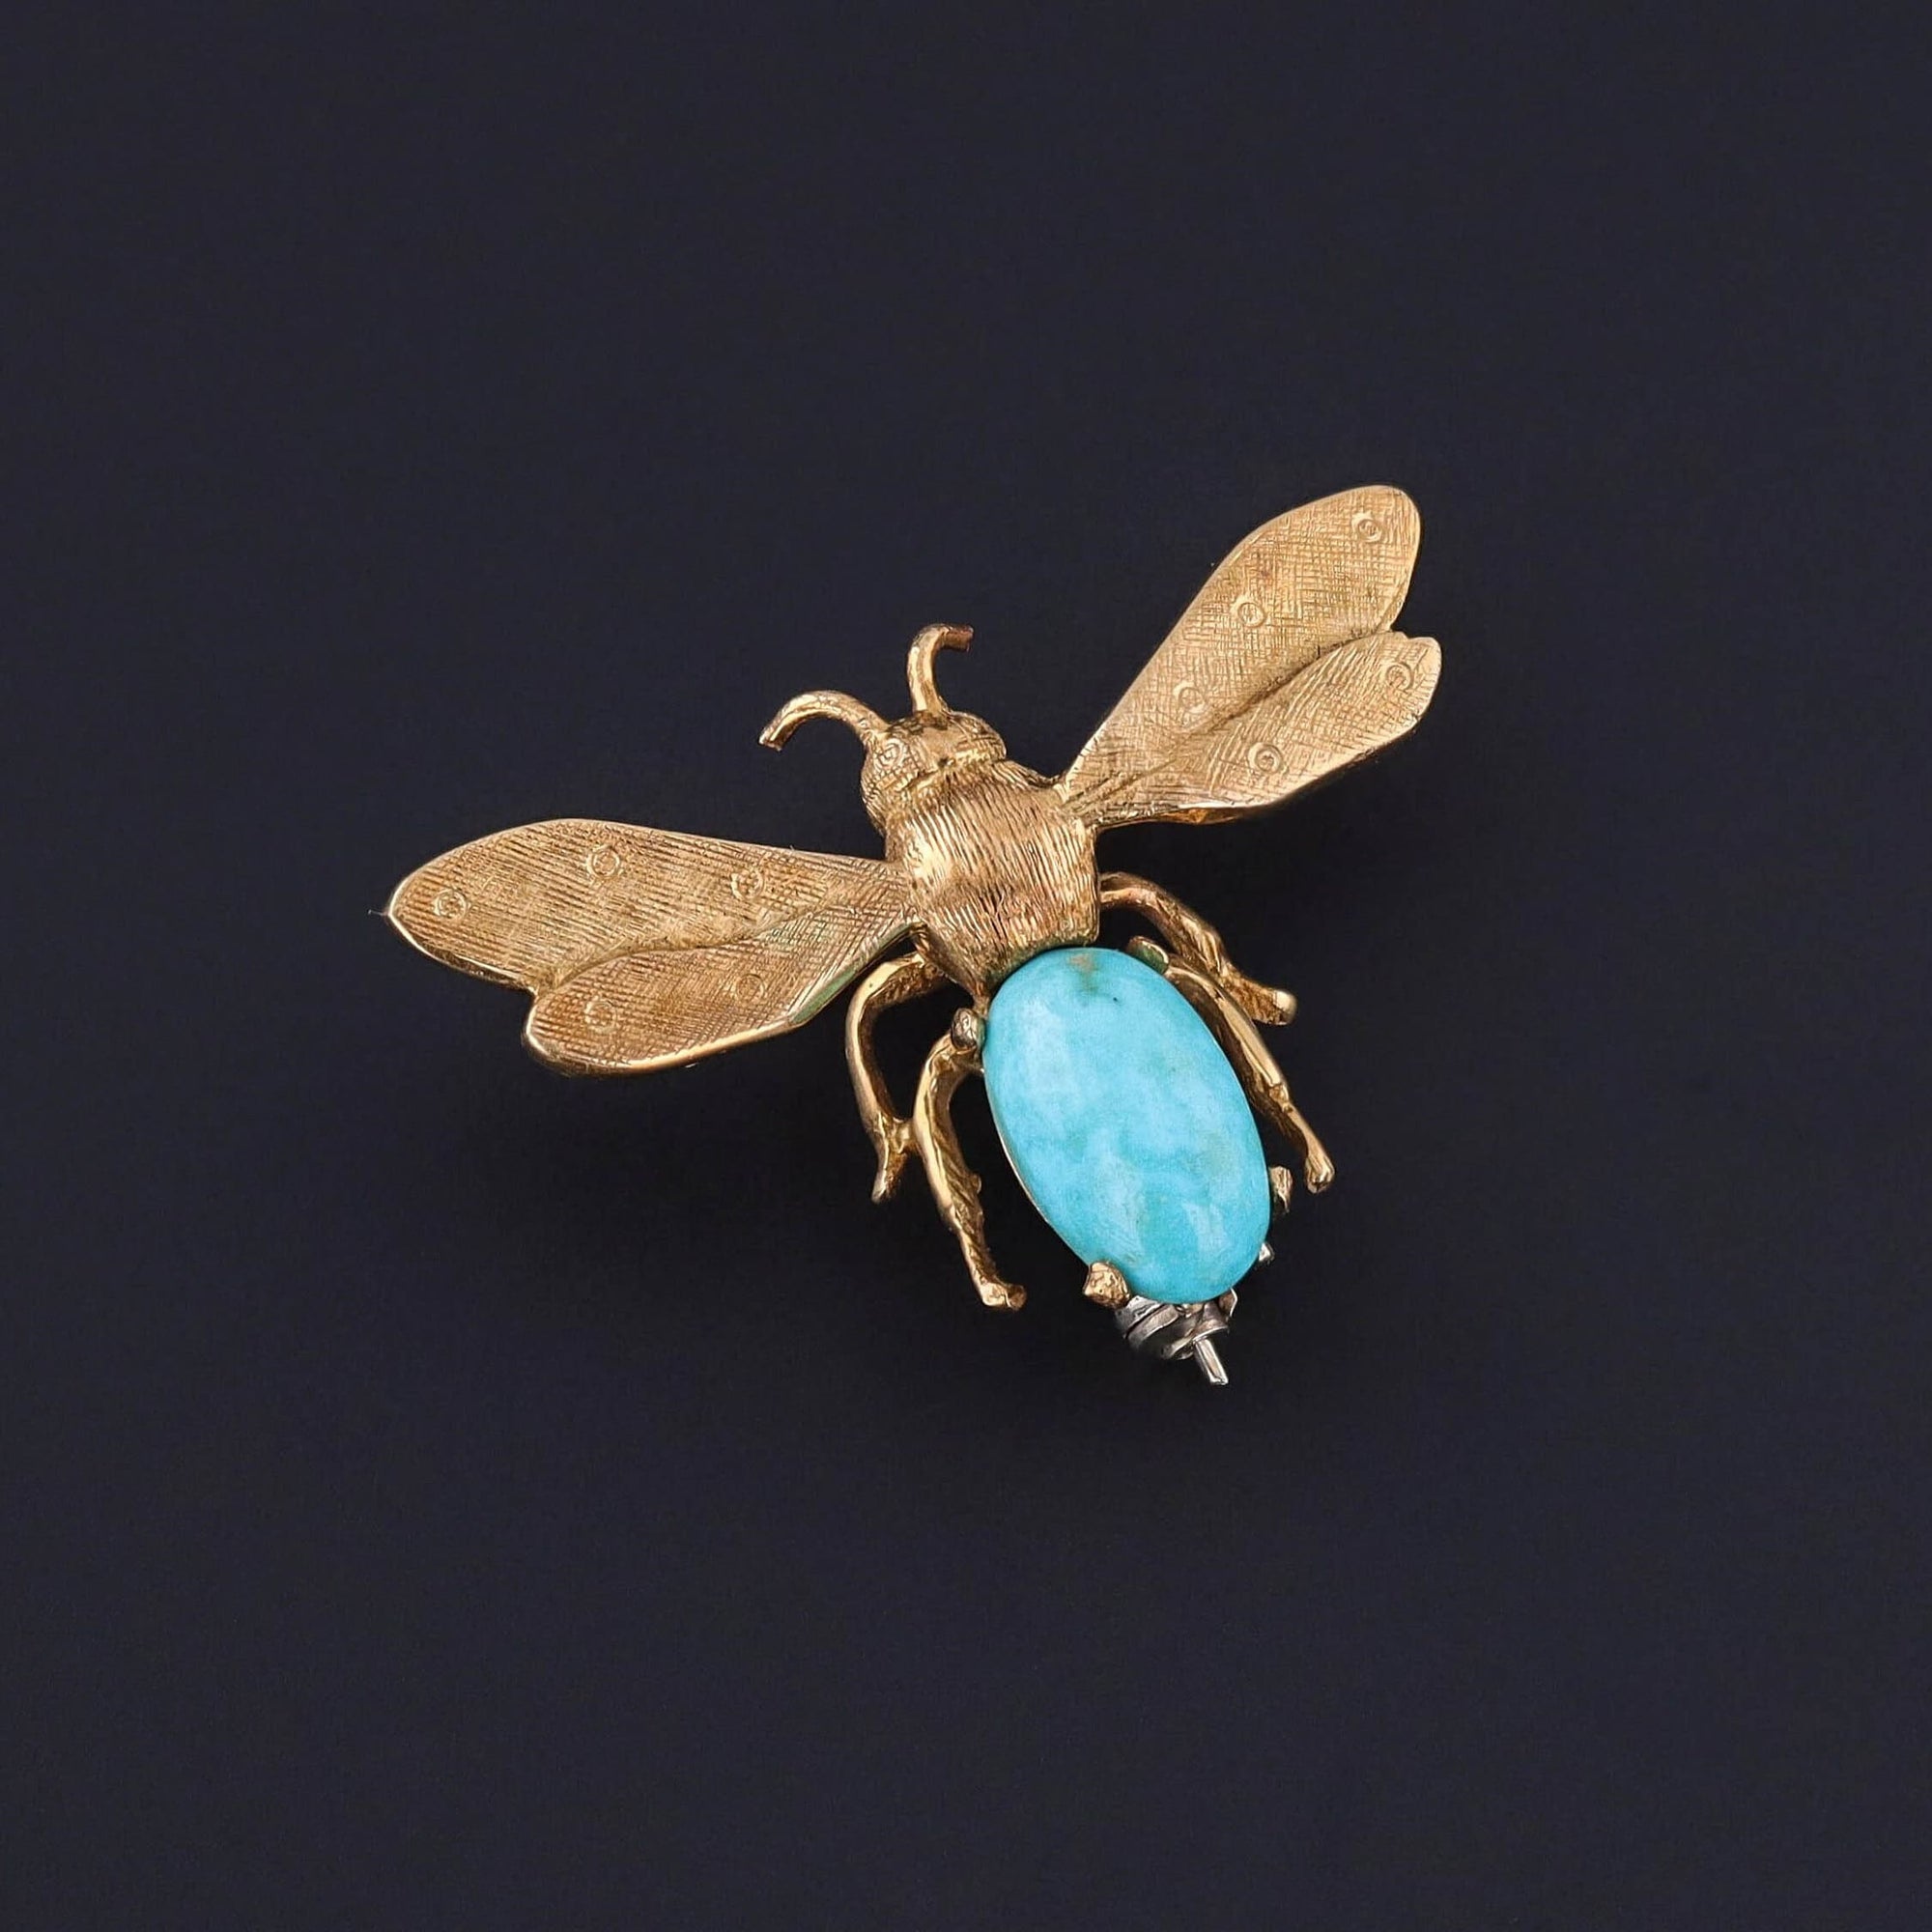 Vintage Turquoise Bee or Insect Brooch of 18k Gold